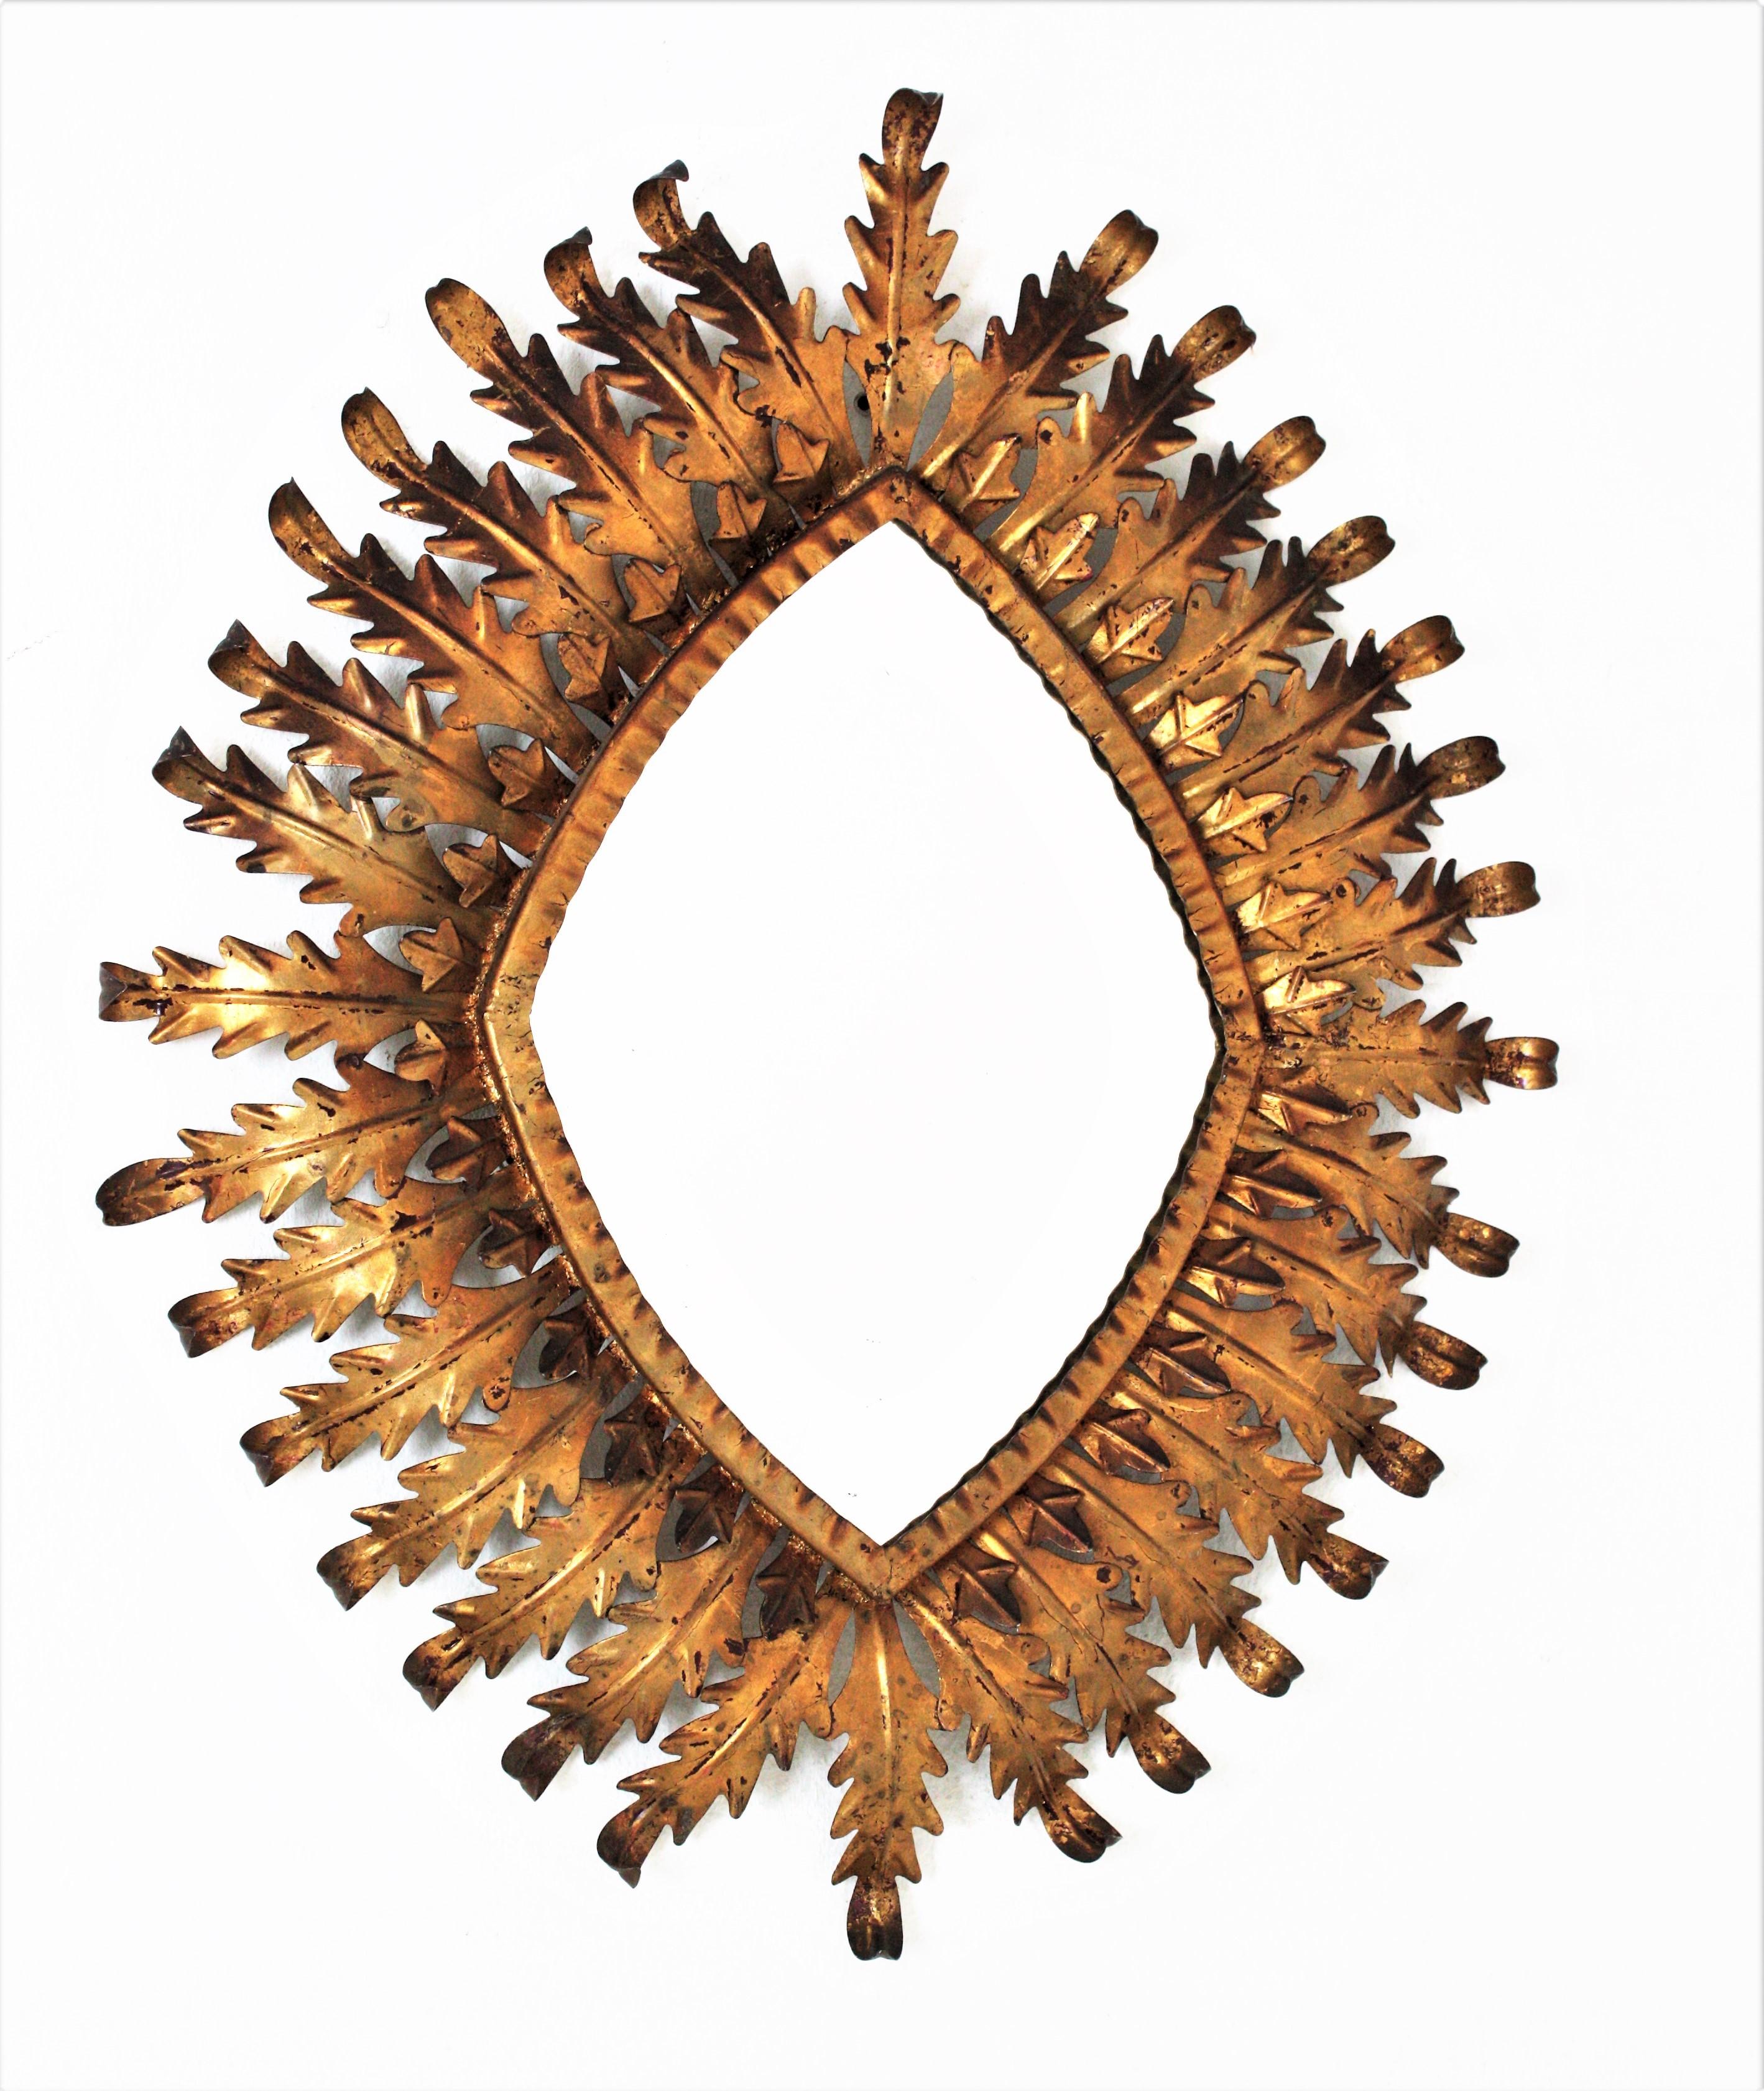 Foliage sunburst mirror, gilt iron, gold leaf. France, 1950s.
Hollywood Regency sunburst rhombus shaped mirror in gilt metal with double leafed frame. The frame is comprised by a layer of small leaves surrounding the glass and another layer of